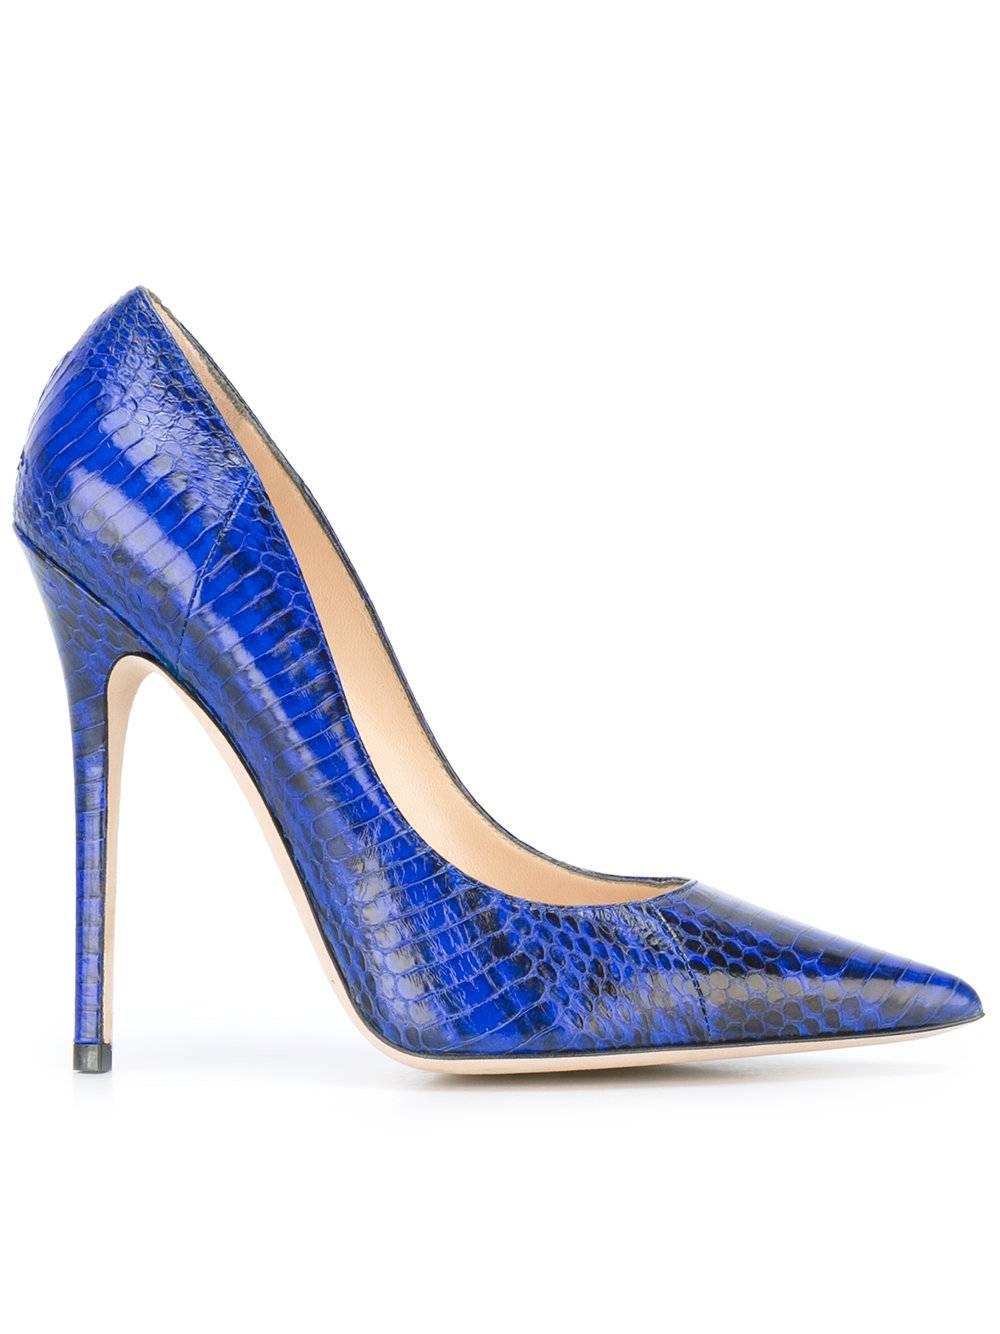 Jimmy Choo New Sold Out Blue Python High Heels Pumps in Box In New Condition In Chicago, IL